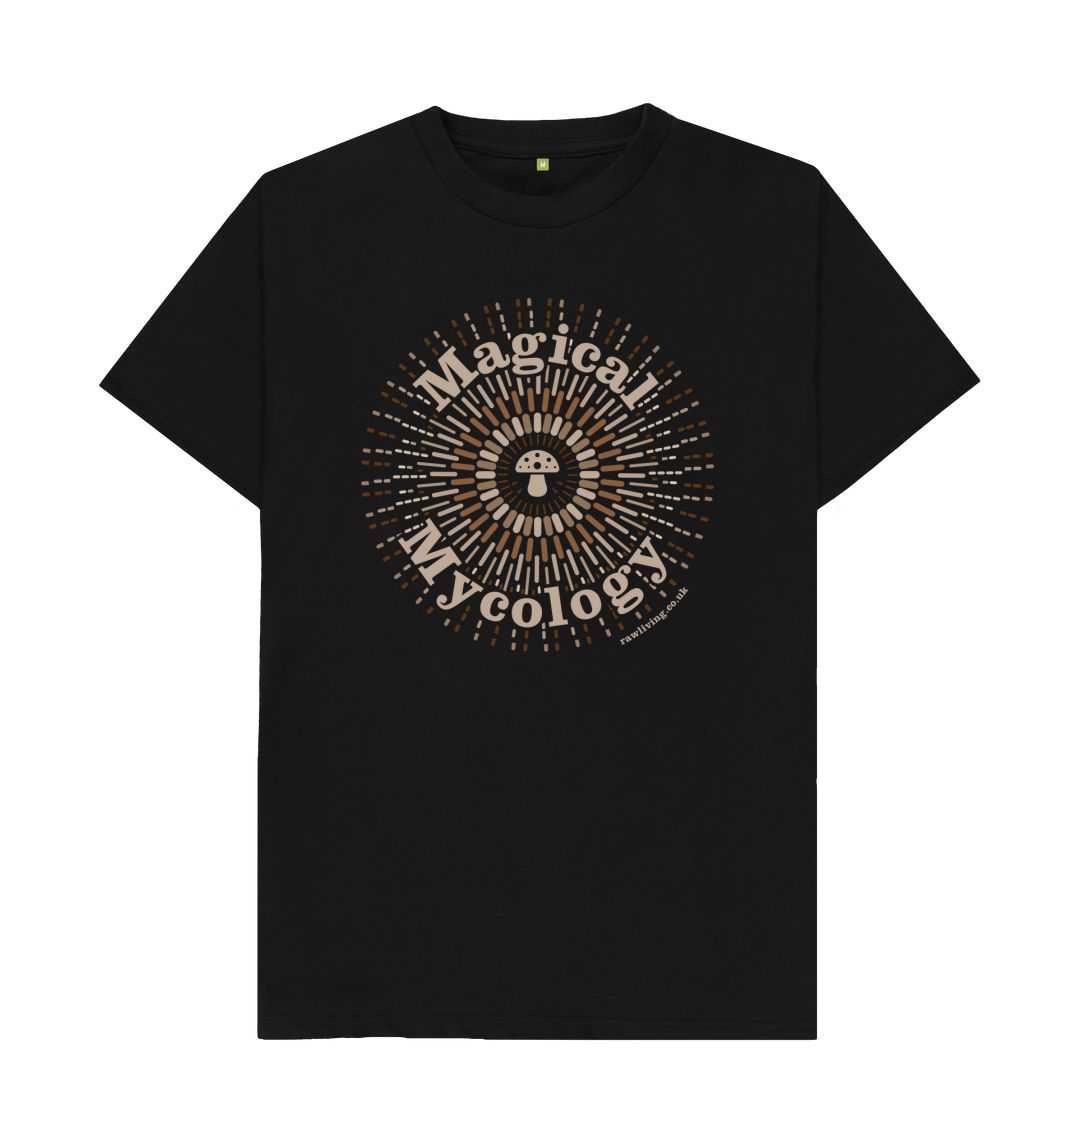 Black Men&#39;s Organic Cotton T-shirt - Magical Mycology | Men&#39;s &#39;Magical Mycology&#39; T-Shirt available in sizes S-XXL and in two colourways, Moss Green and Black.